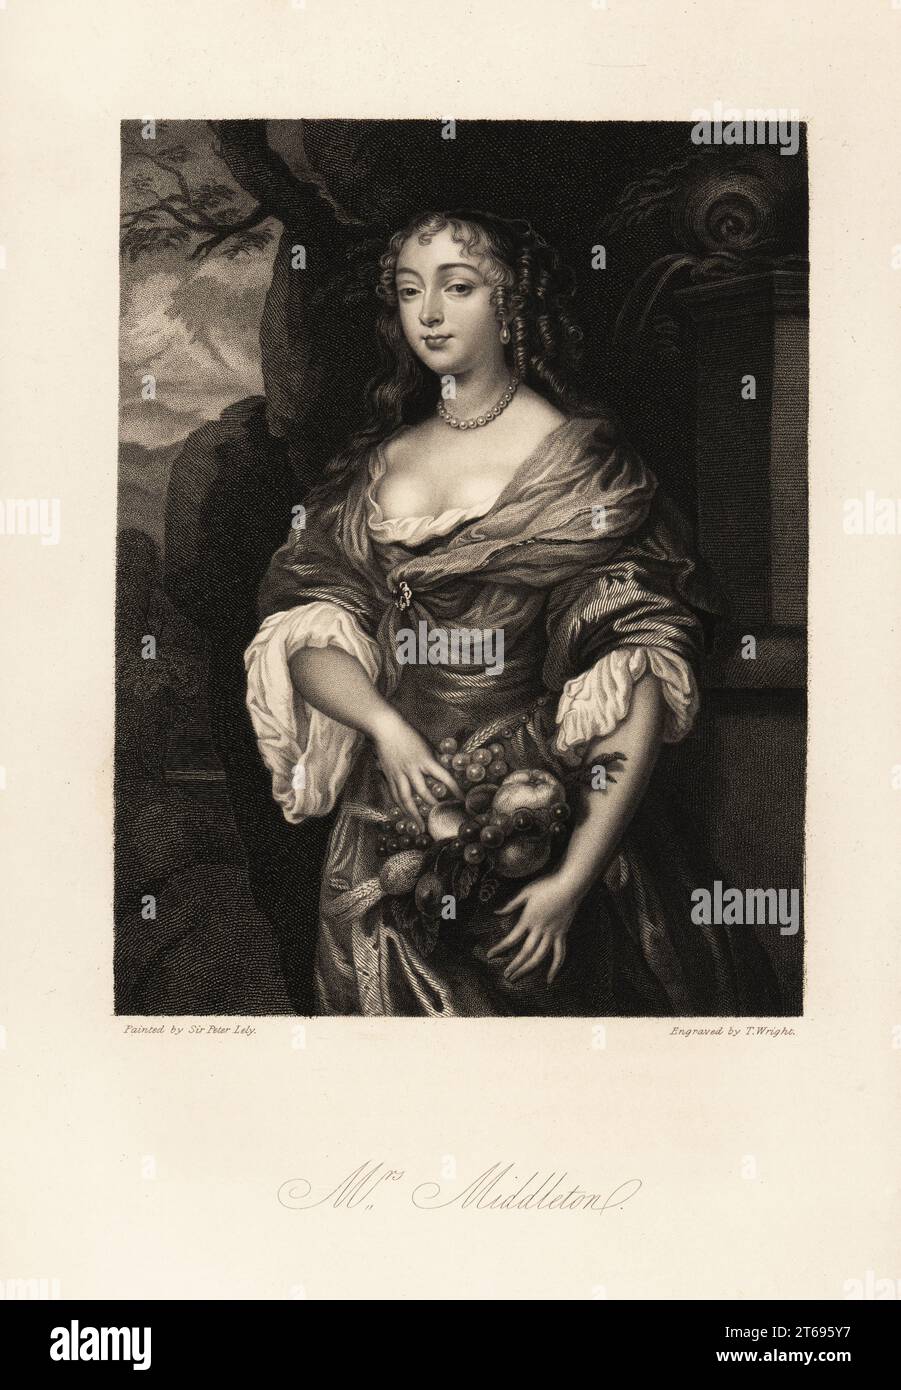 Mrs Jane Middleton, daughter of Sir Roger Needham, a woman of exquisite beauty says Granger, died c.1685.. Depicted with a cornucopia of fruit. Steel engraving by Thomas Wright after a portrait by Sir Peter Lely from Mrs Anna Jamesons Memoirs of the Beauties of the Court of King Charles the Second, Henry Coburn, London, 1838. Stock Photo